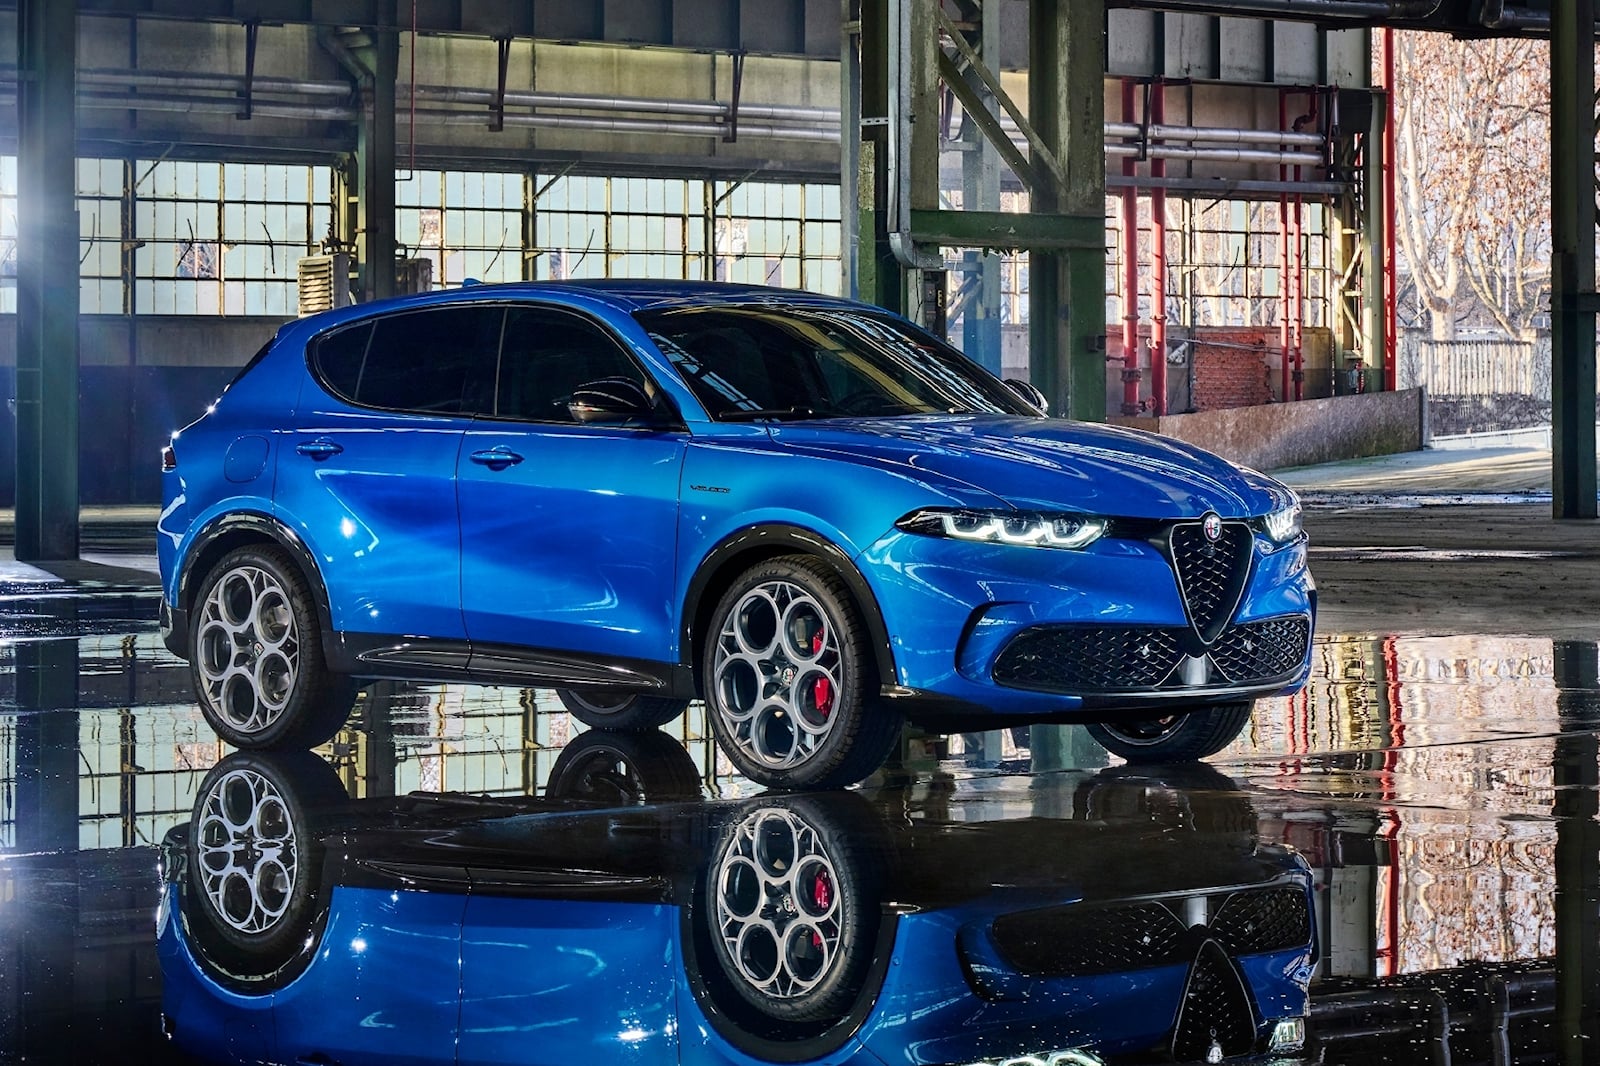 Alfa Romeo Milano: Everything We Know About the New Small SUV